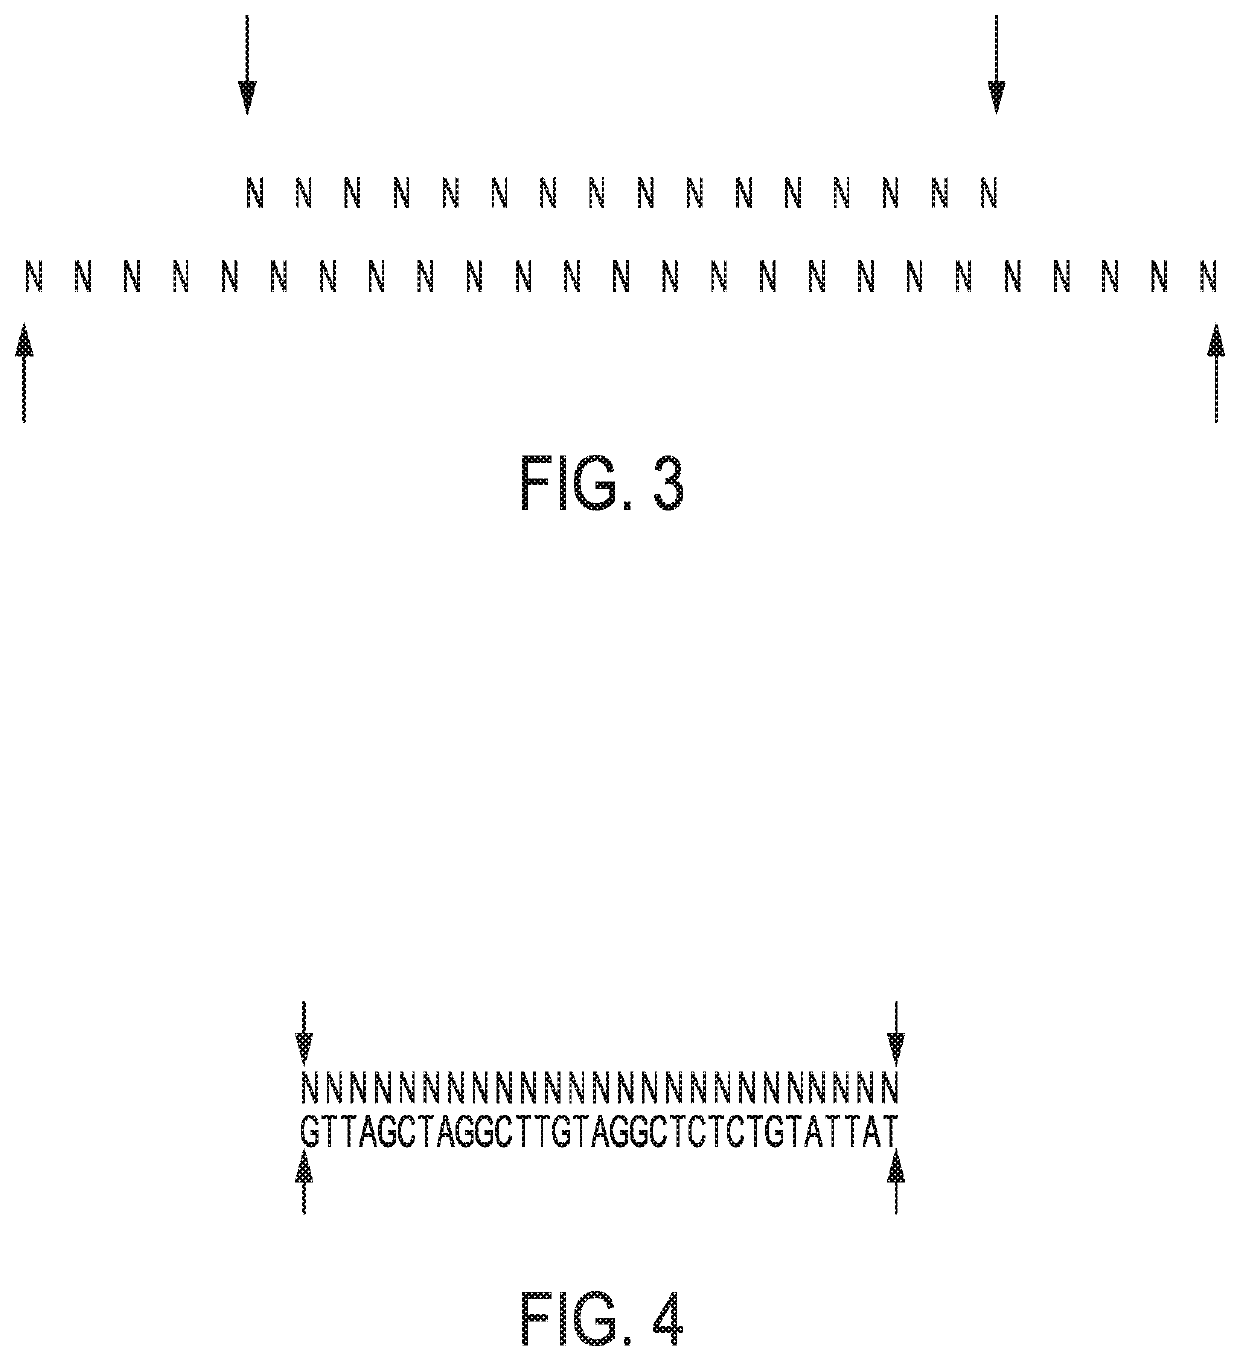 Systems and methods using DNA sequence strings as a common data format for forensic DNA typing applications